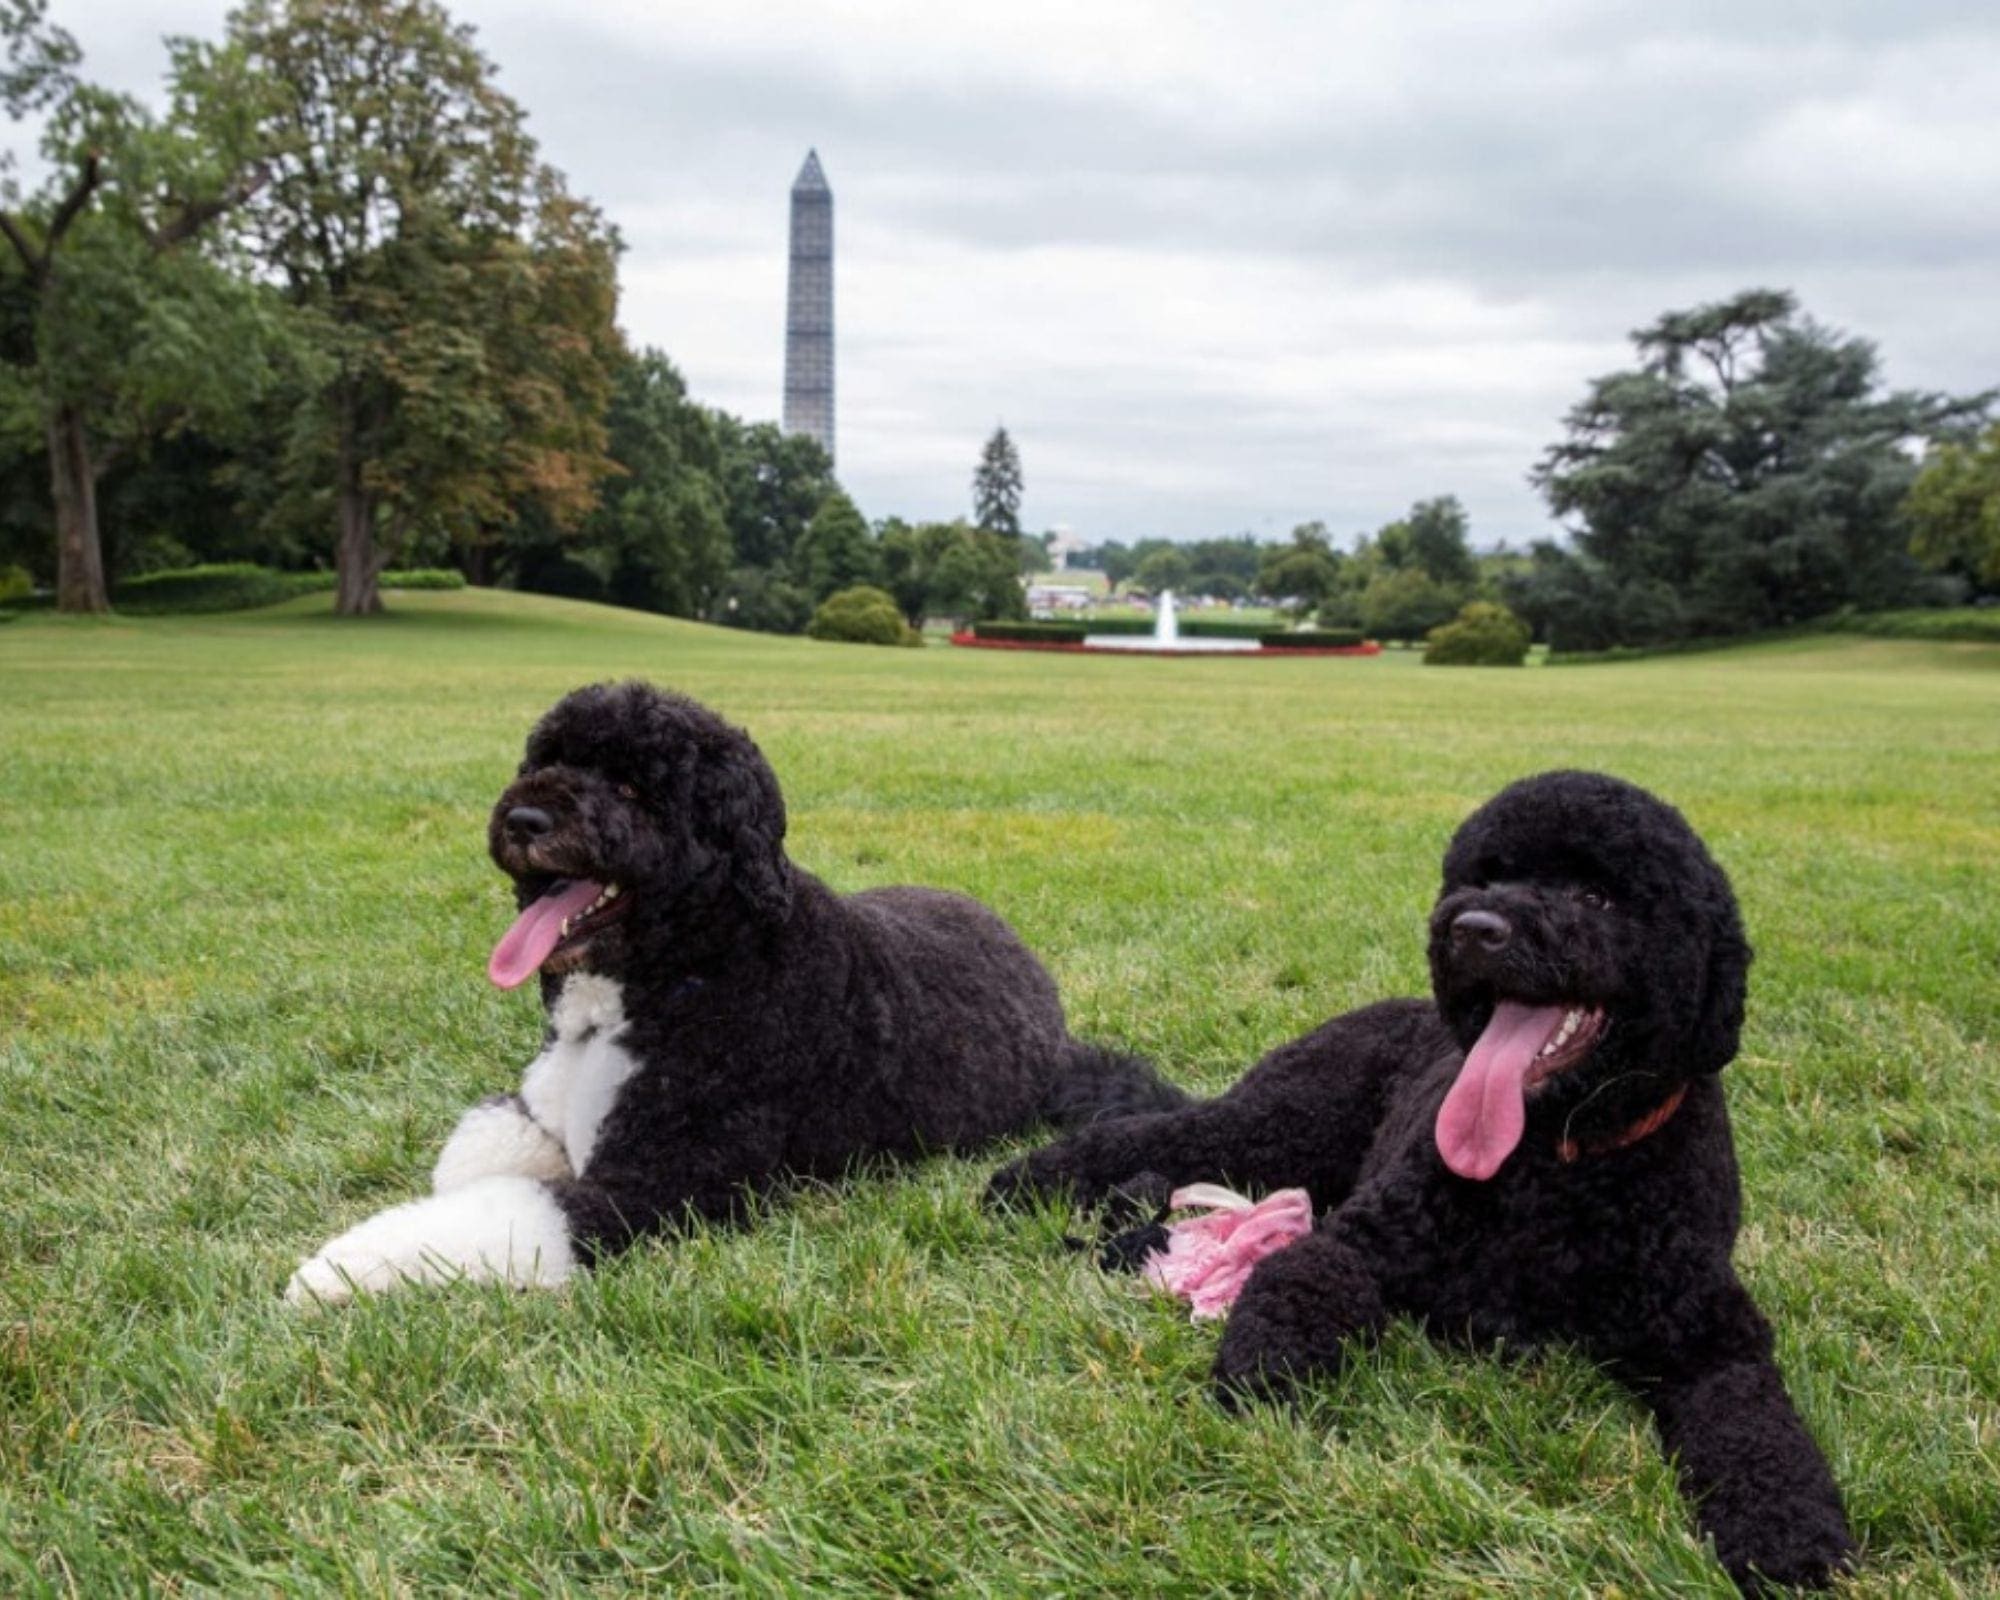 Aug. 19, 2013Bo, left, and Sunny lie together on the South Lawn of the White House. Pete Souza, The White House